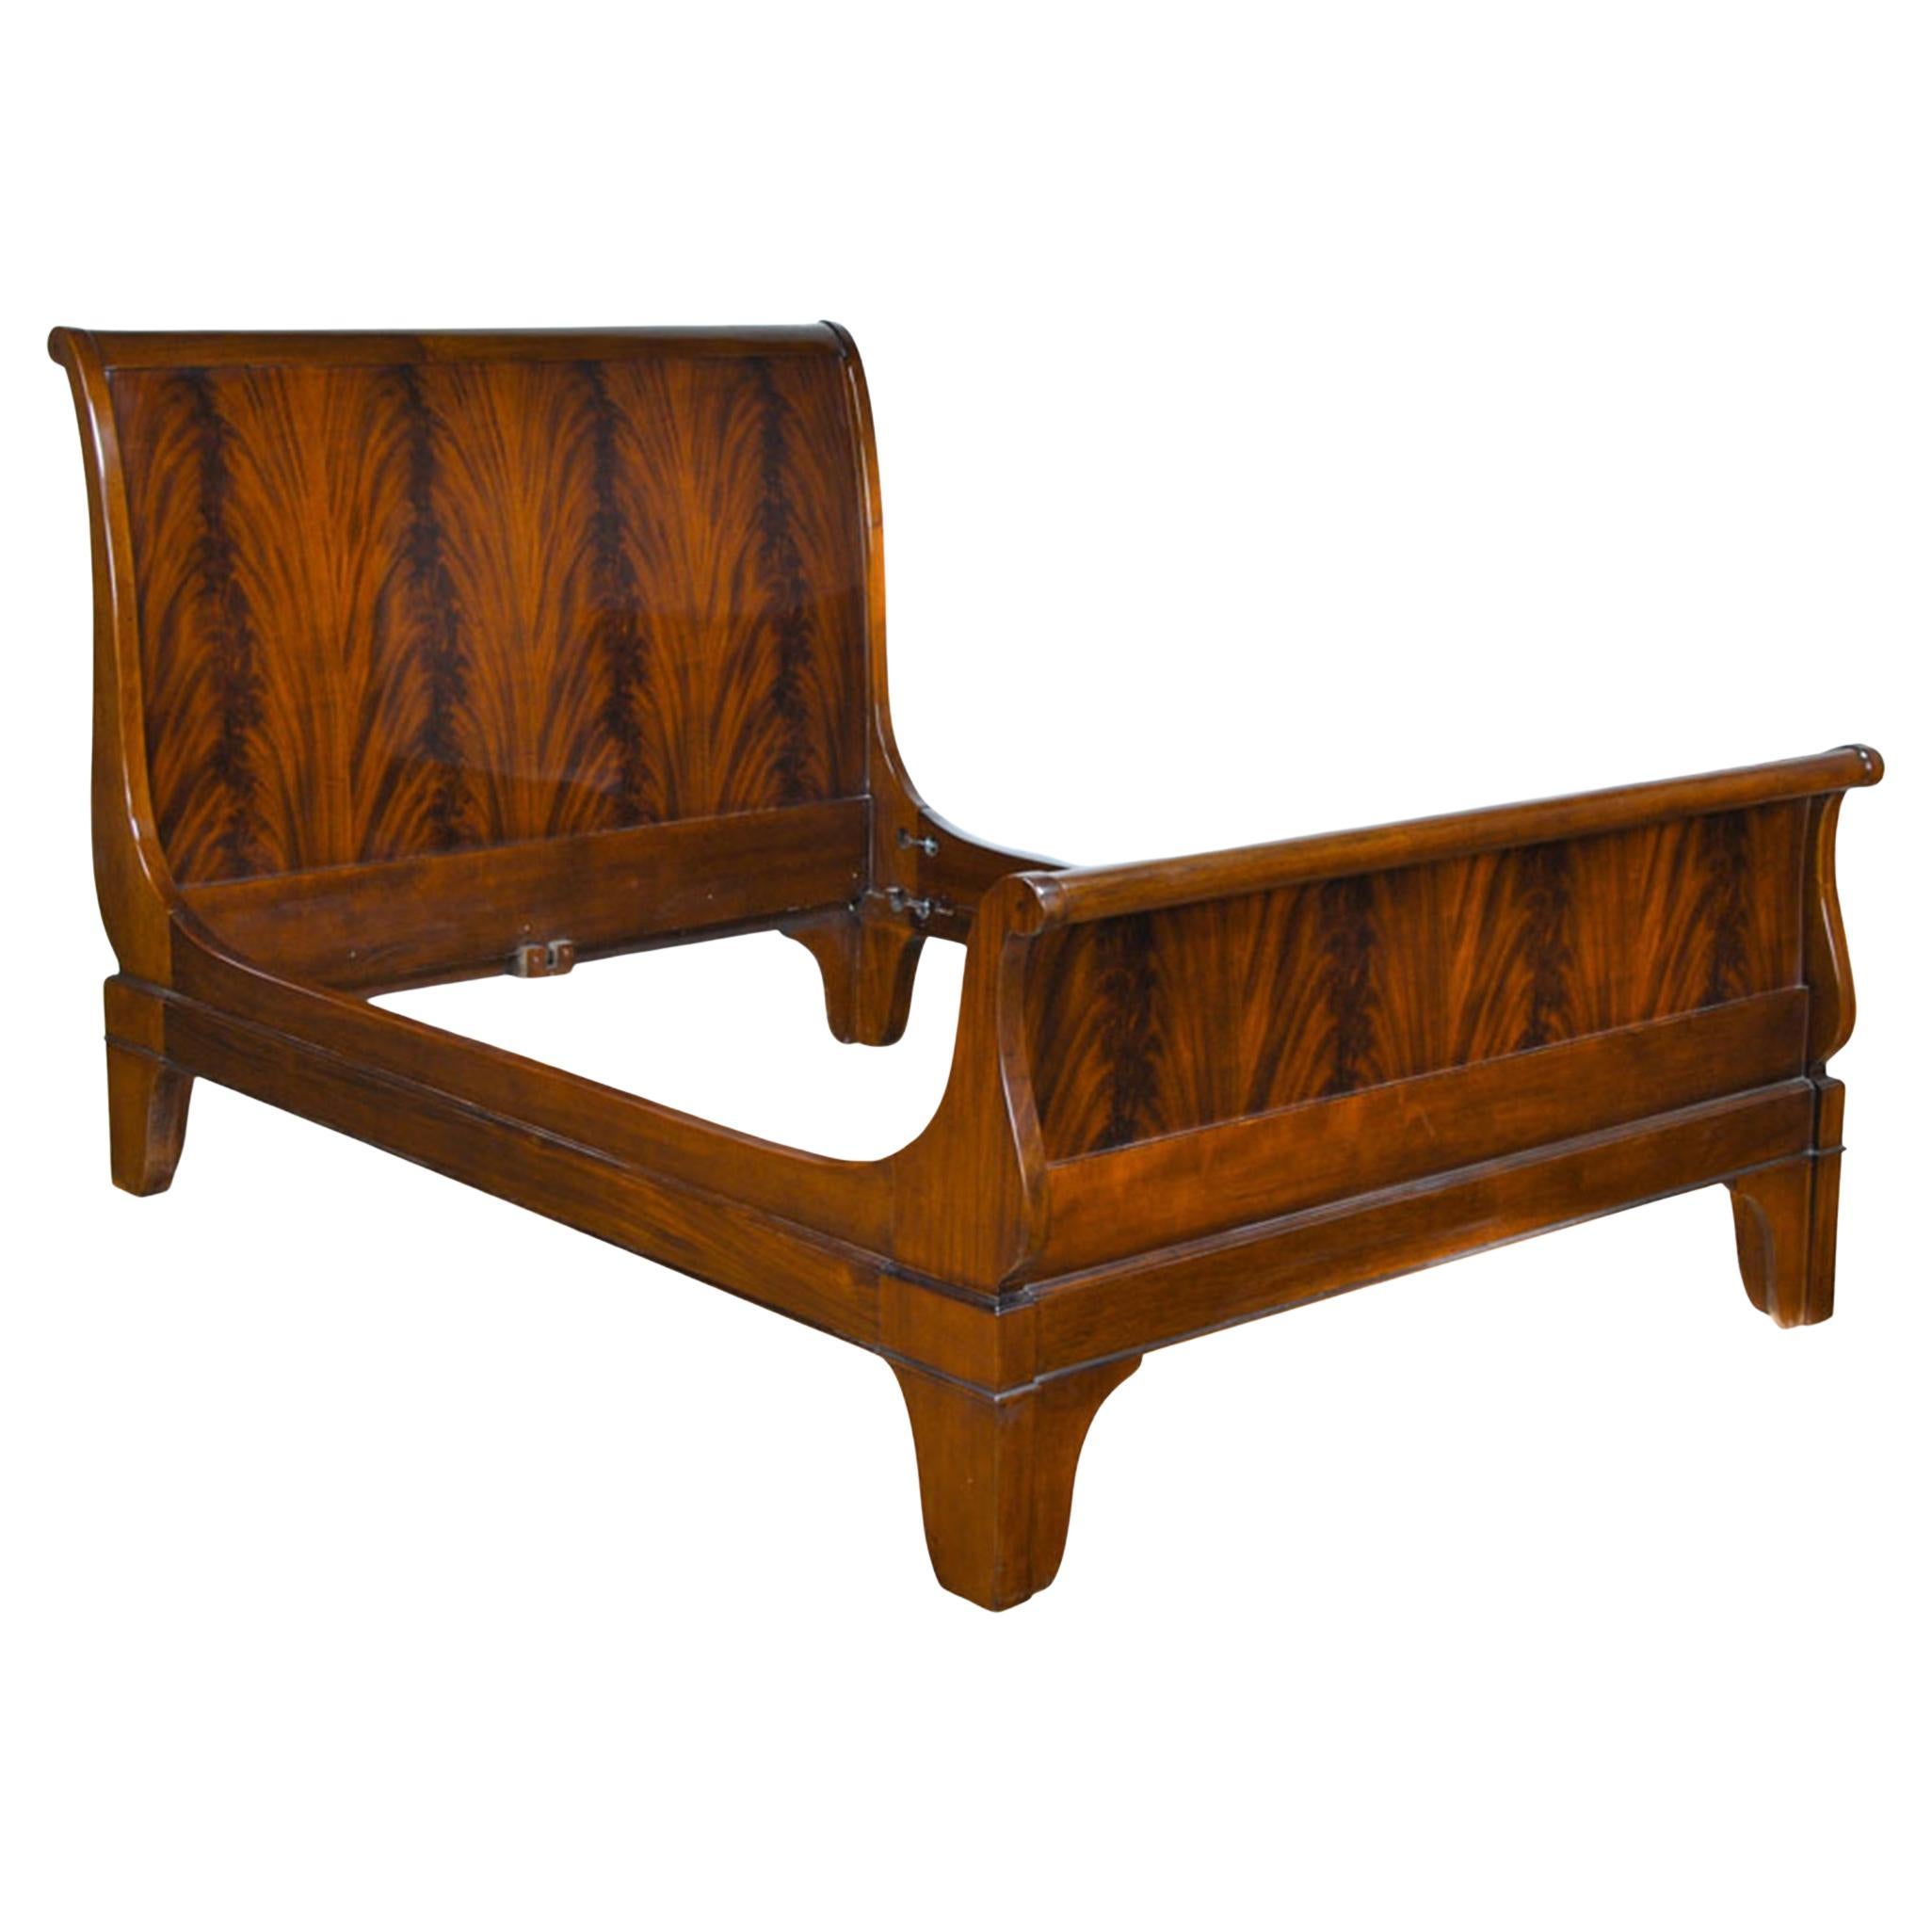 Mahogany King Size Sleigh Bed For Sale